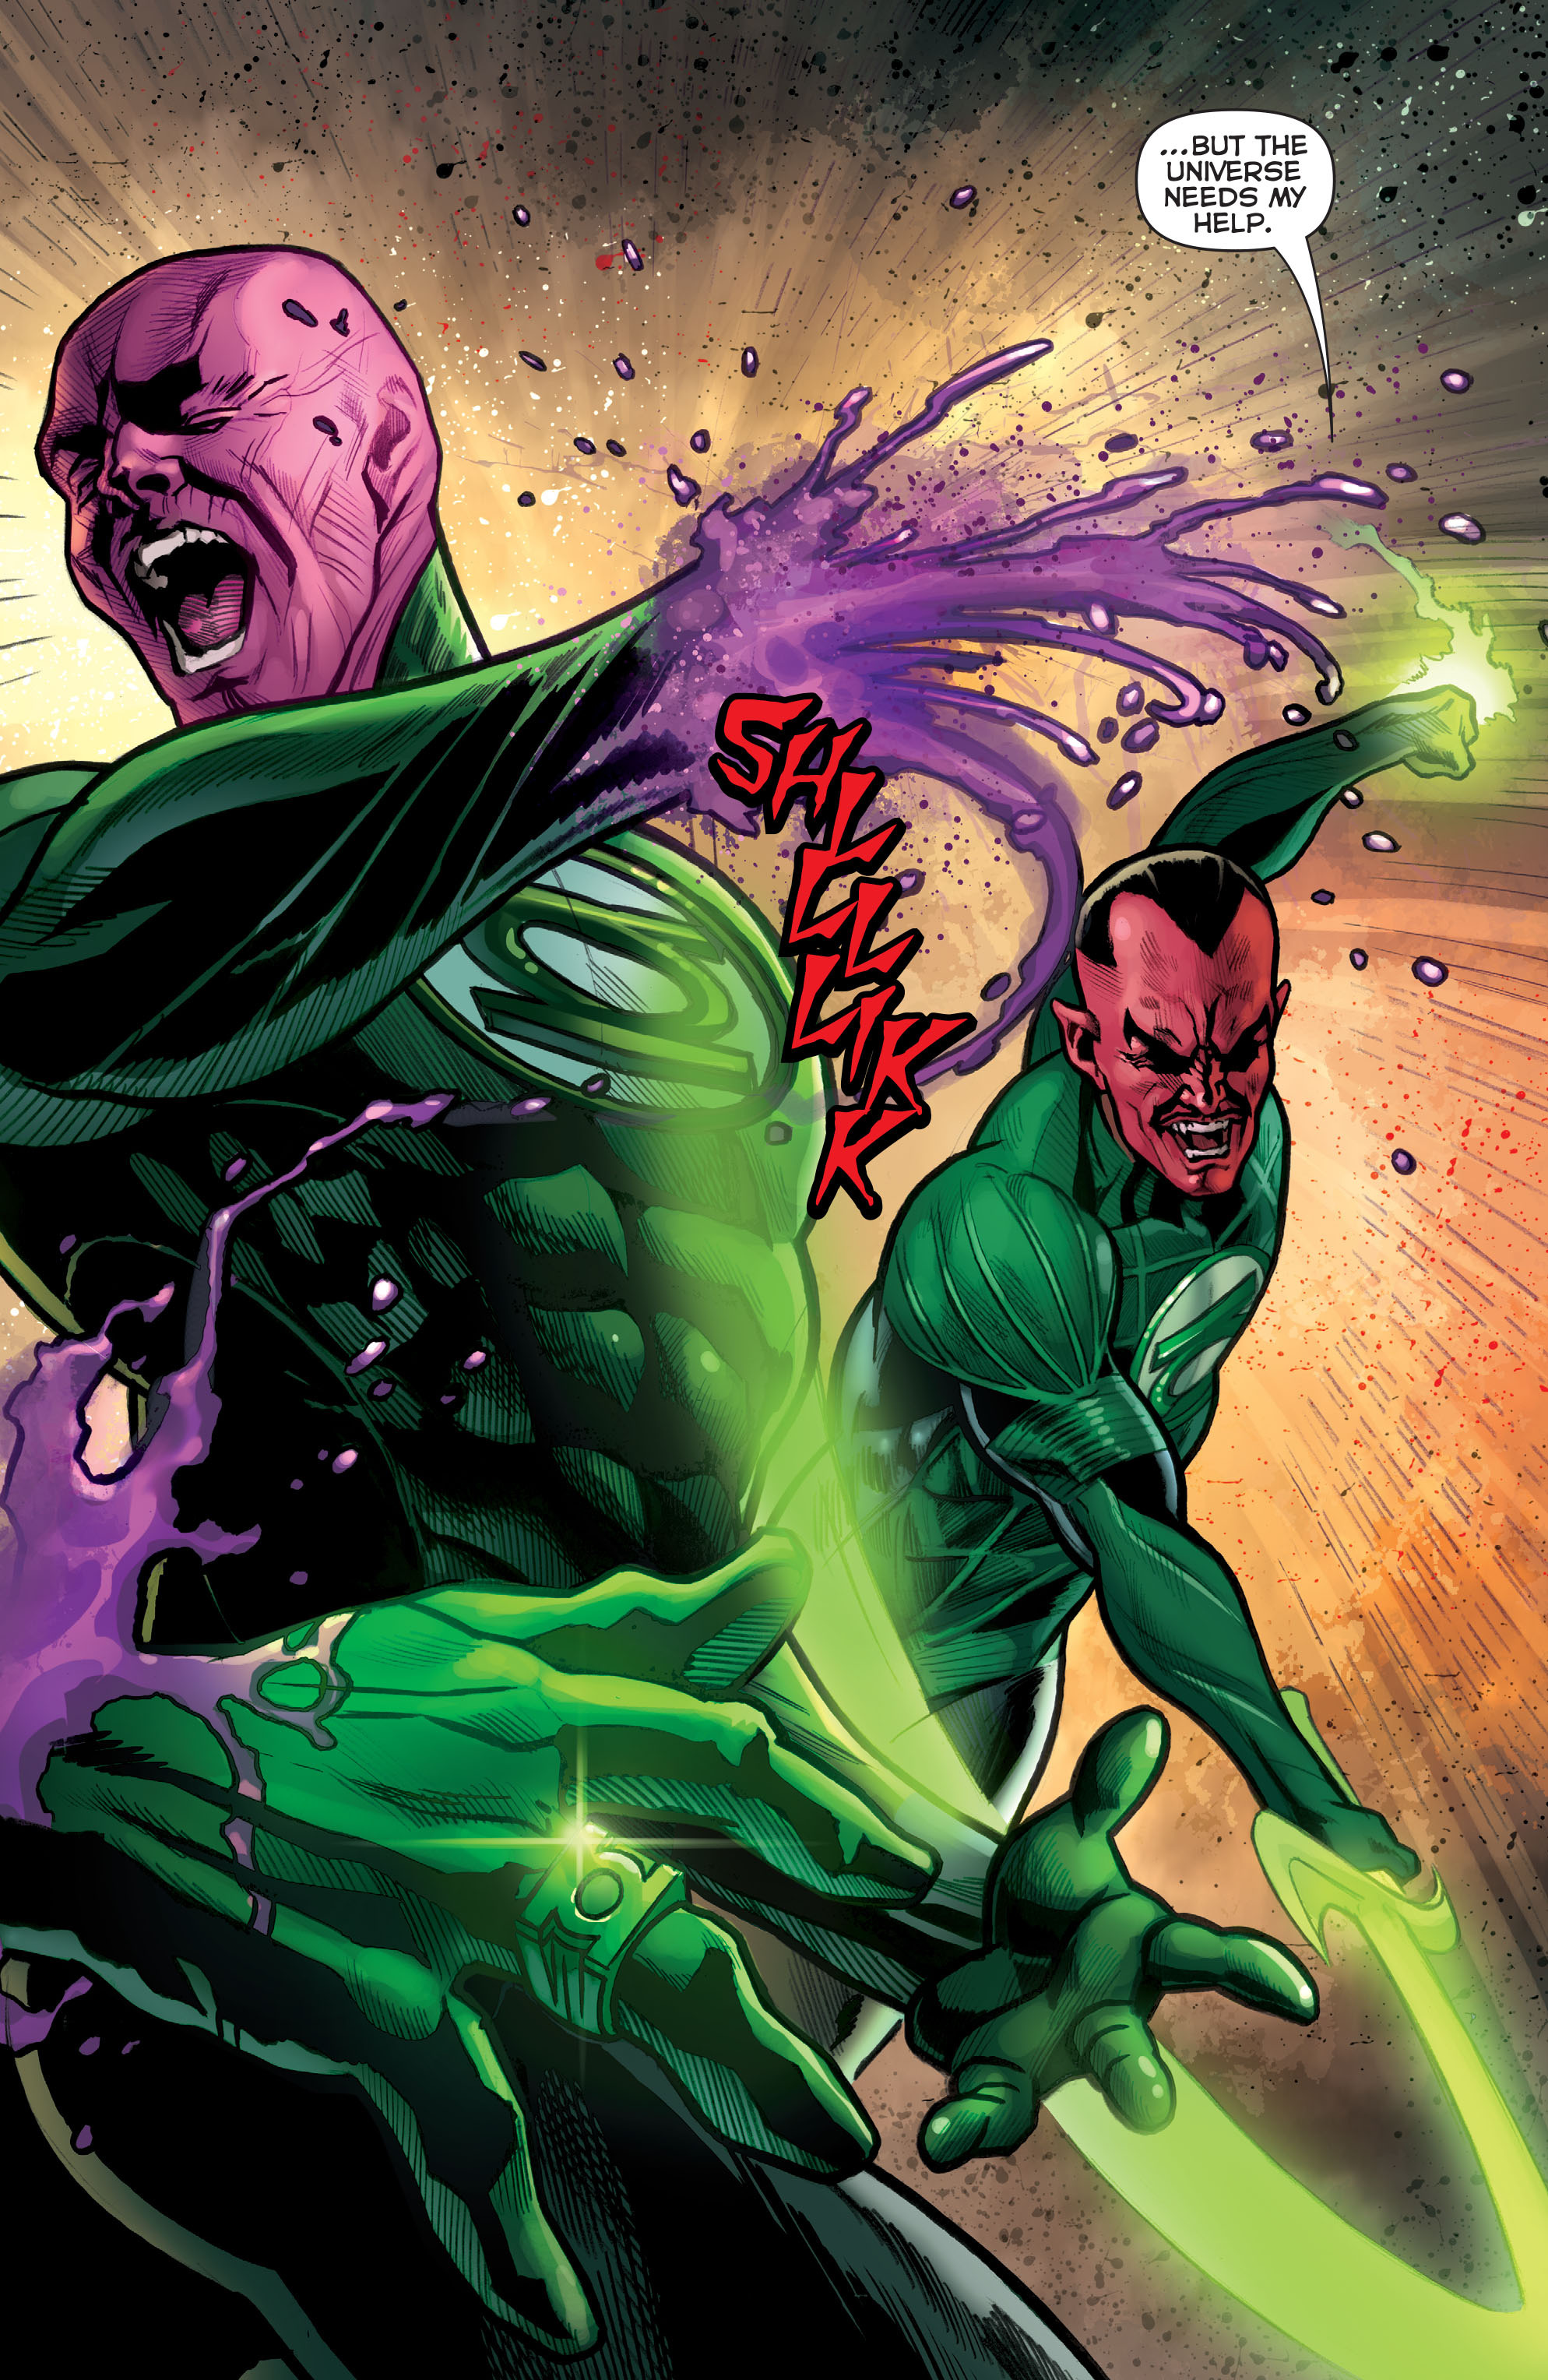 Flashpoint: The World of Flashpoint Featuring Green Lantern Full #1 - English 43